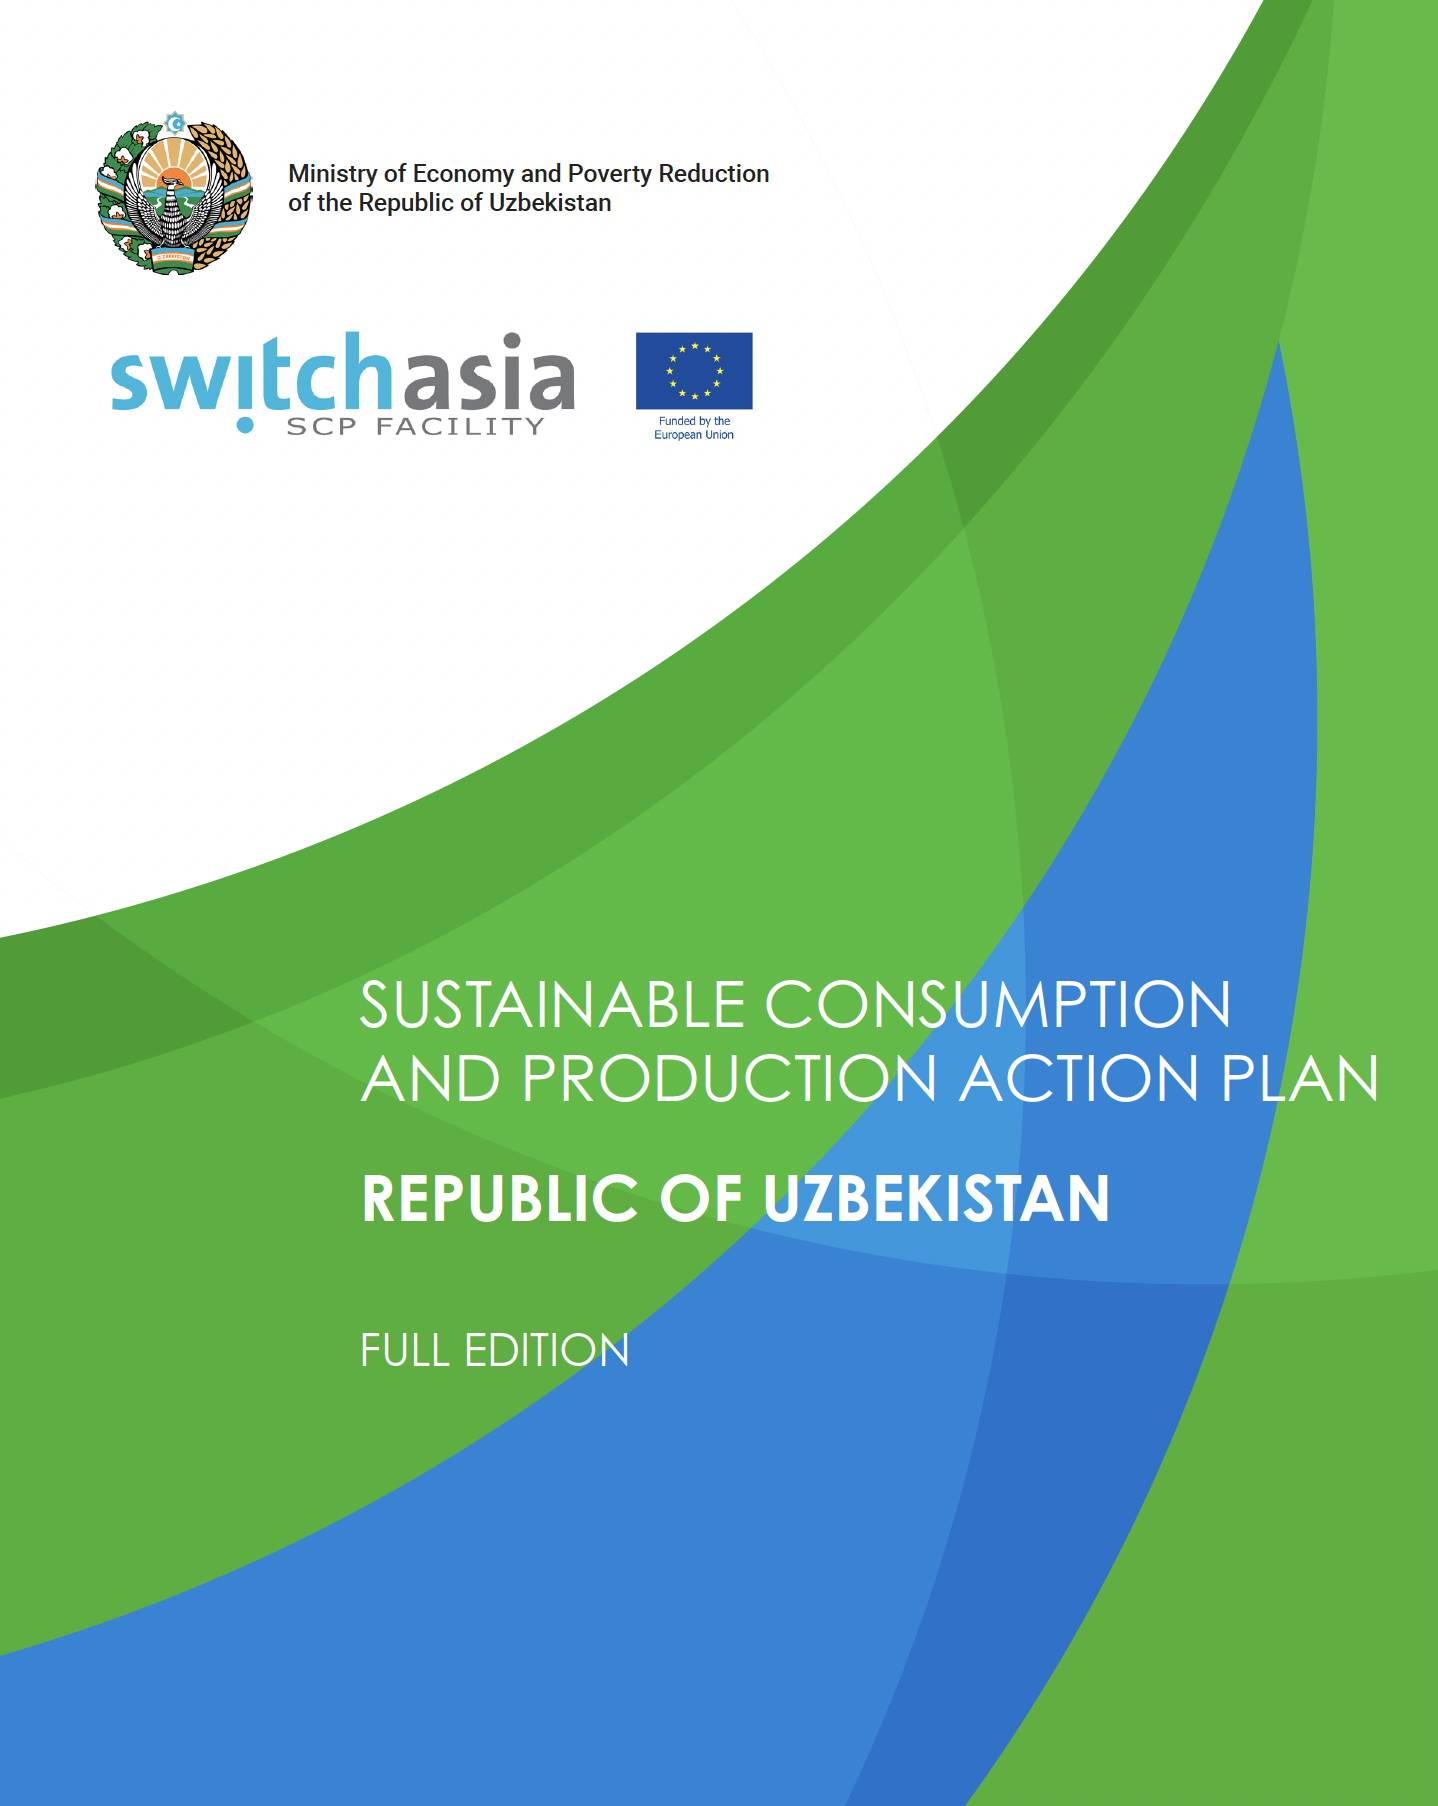 Sustainable Consumption and Production Action Plan of the Republic of Uzbekistan